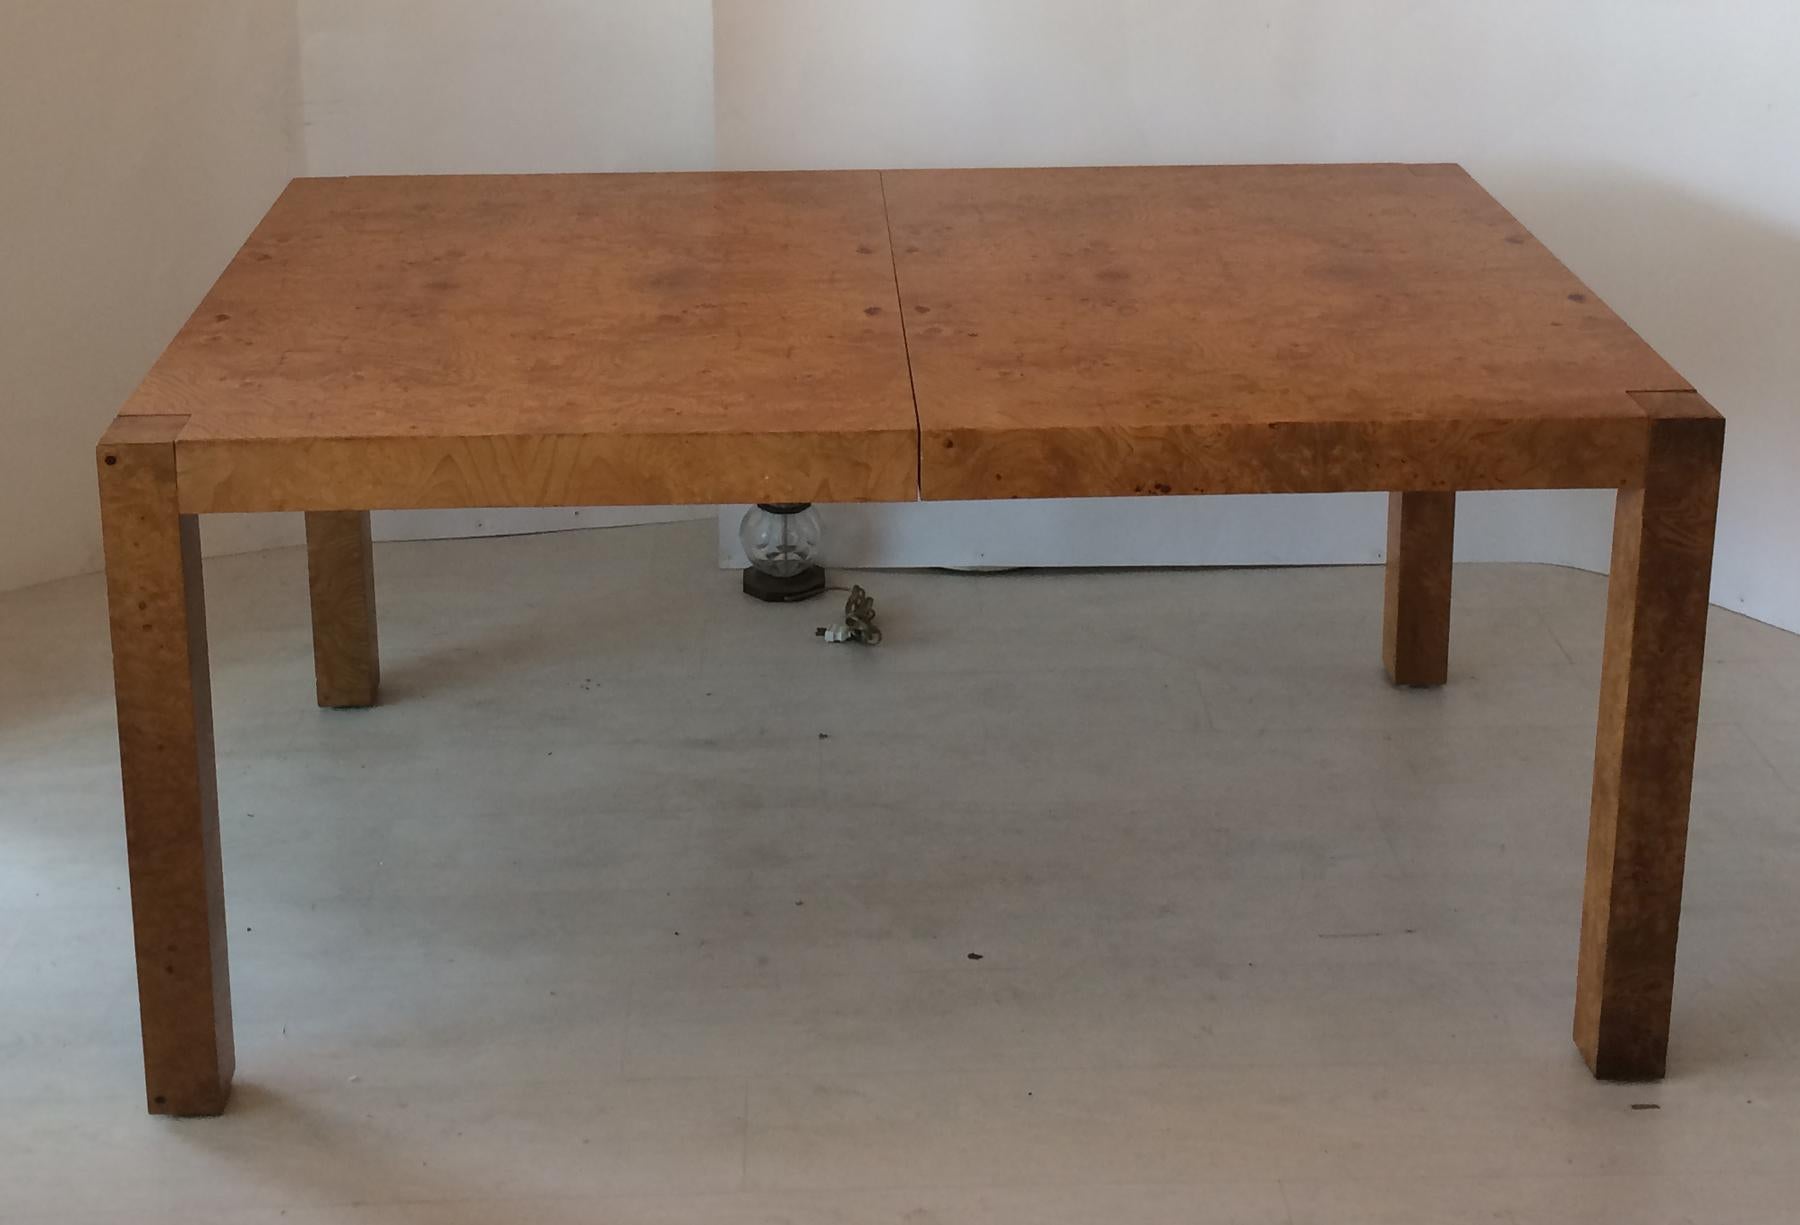 Table was originally designed by Milo Baughman for Dillingham Manufacturing Company. After lane bought Dillingham they continued to manufacture this design under the Lane Furniture name. Comes with two 18 inch leafs. Leaves are a little darker in